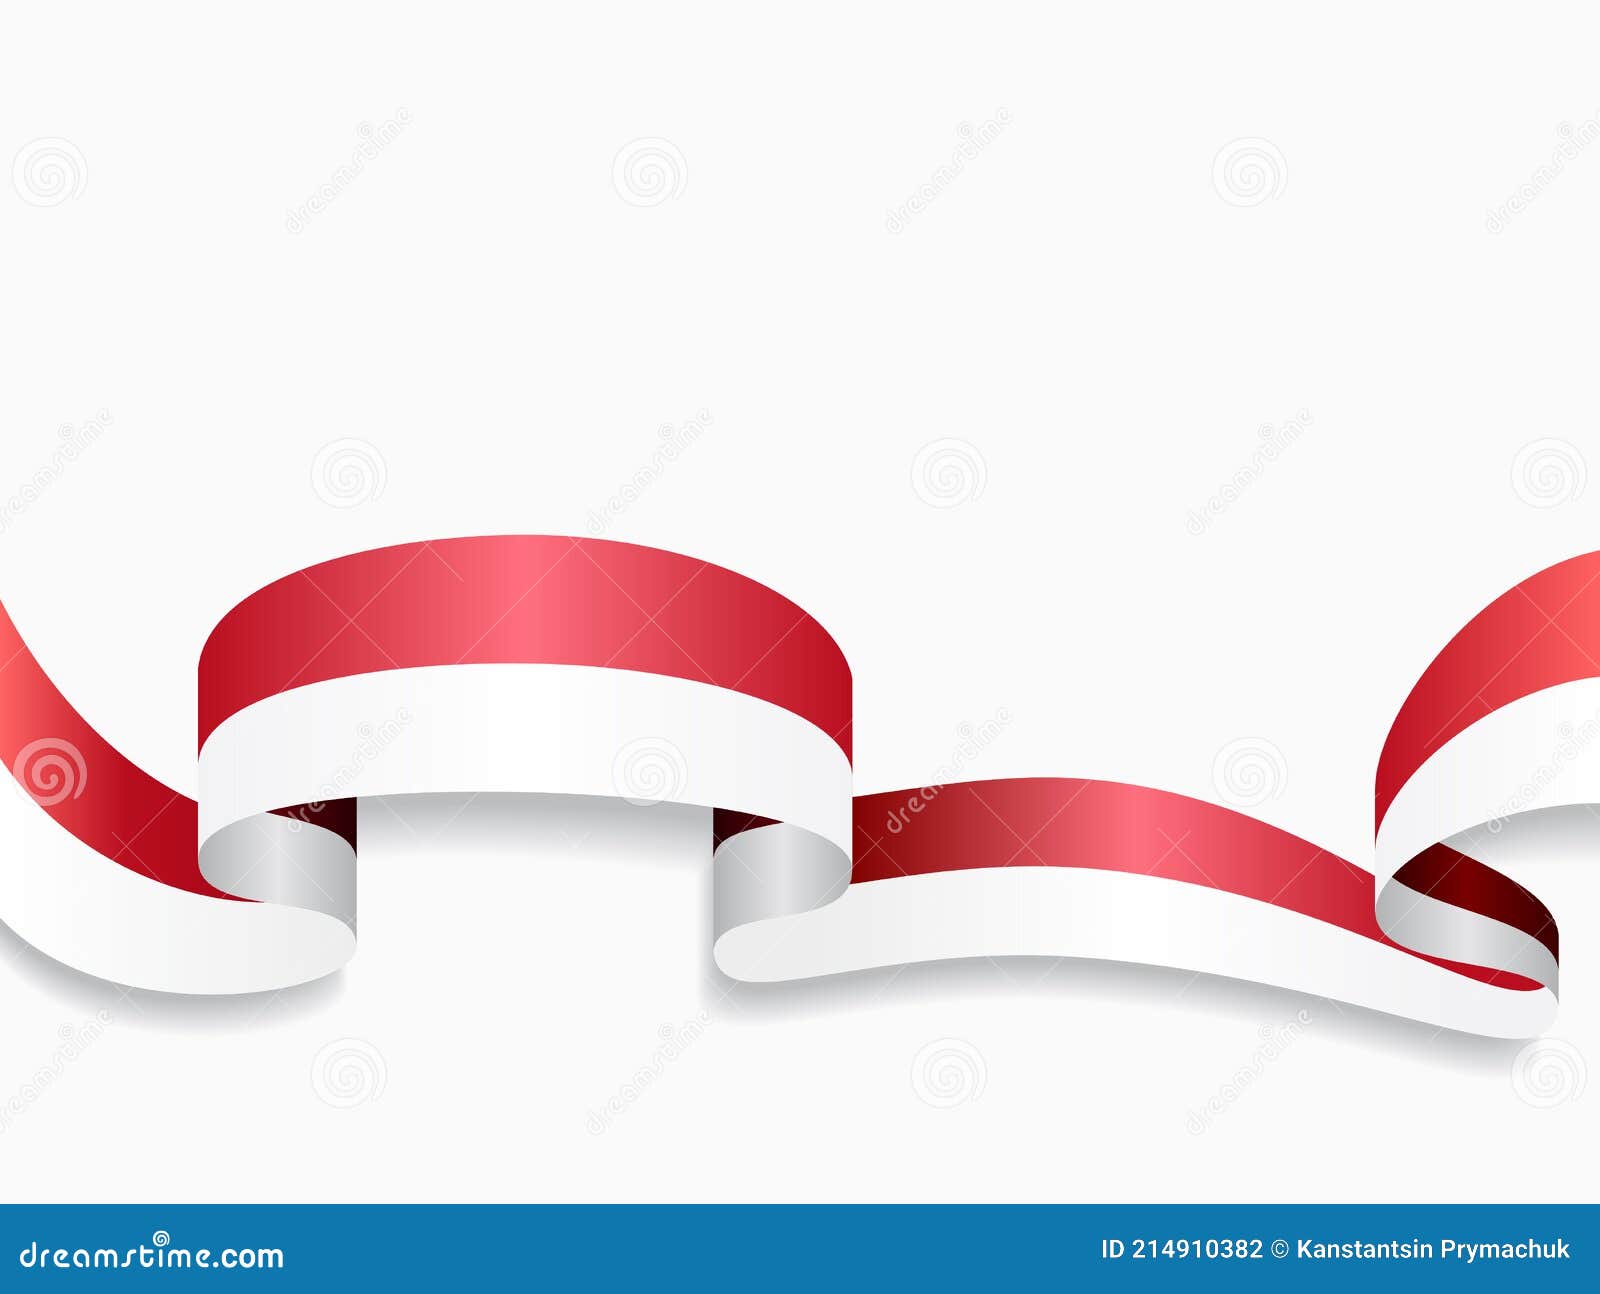 Indonesian Flag Wavy Abstract Background. Vector Illustration. Stock ...